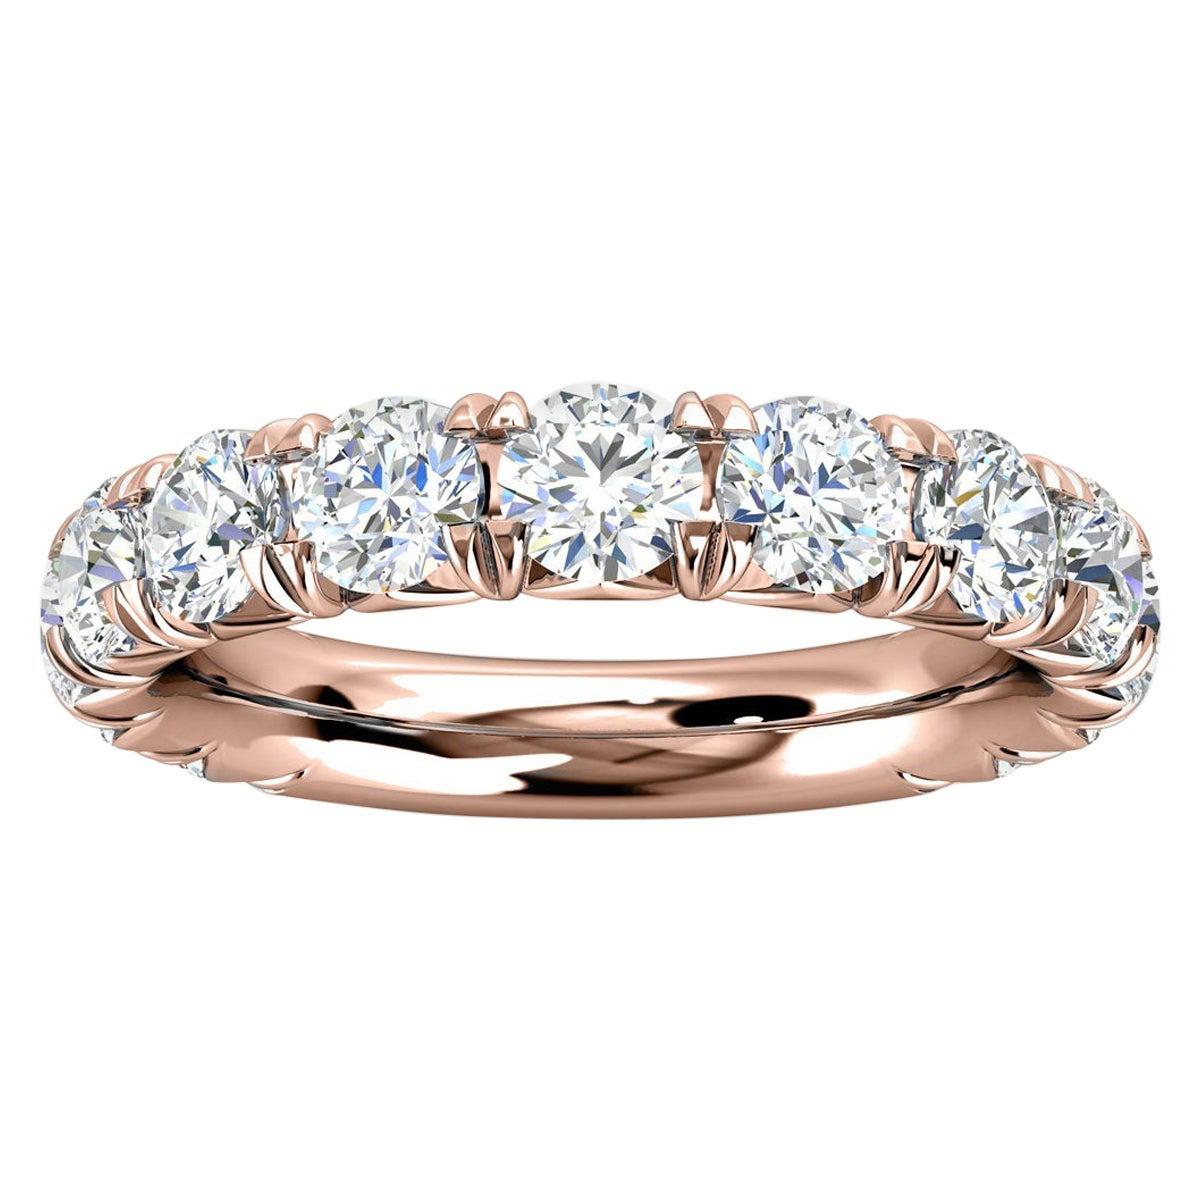 For Sale:  18K Rose Gold Gia French Pave Diamond Ring '2 Ct. tw'